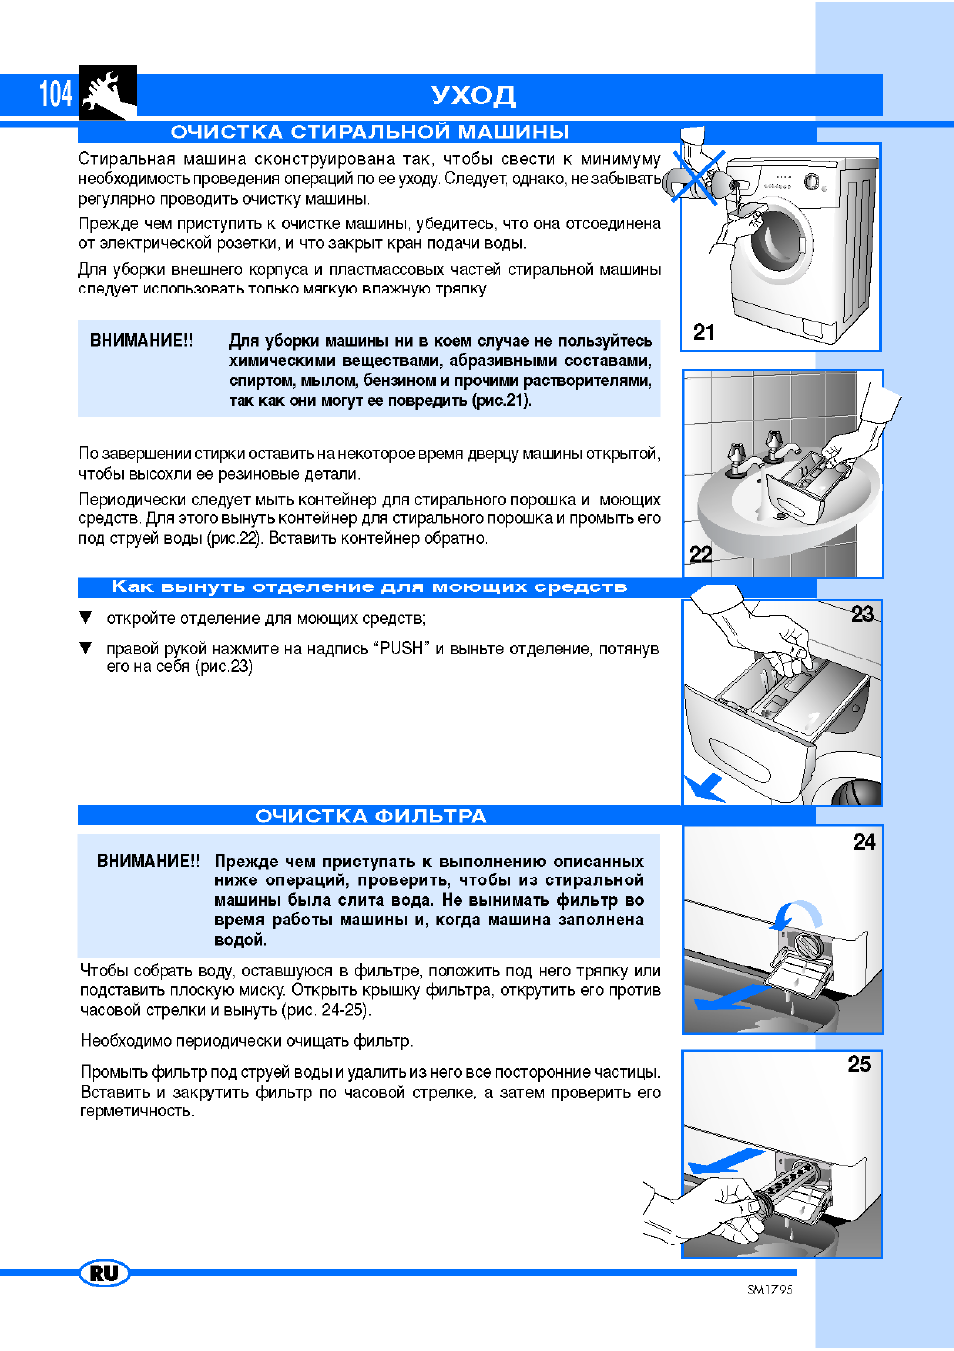 Care, Cleaning the washing machine, How to remove the detergent compartment